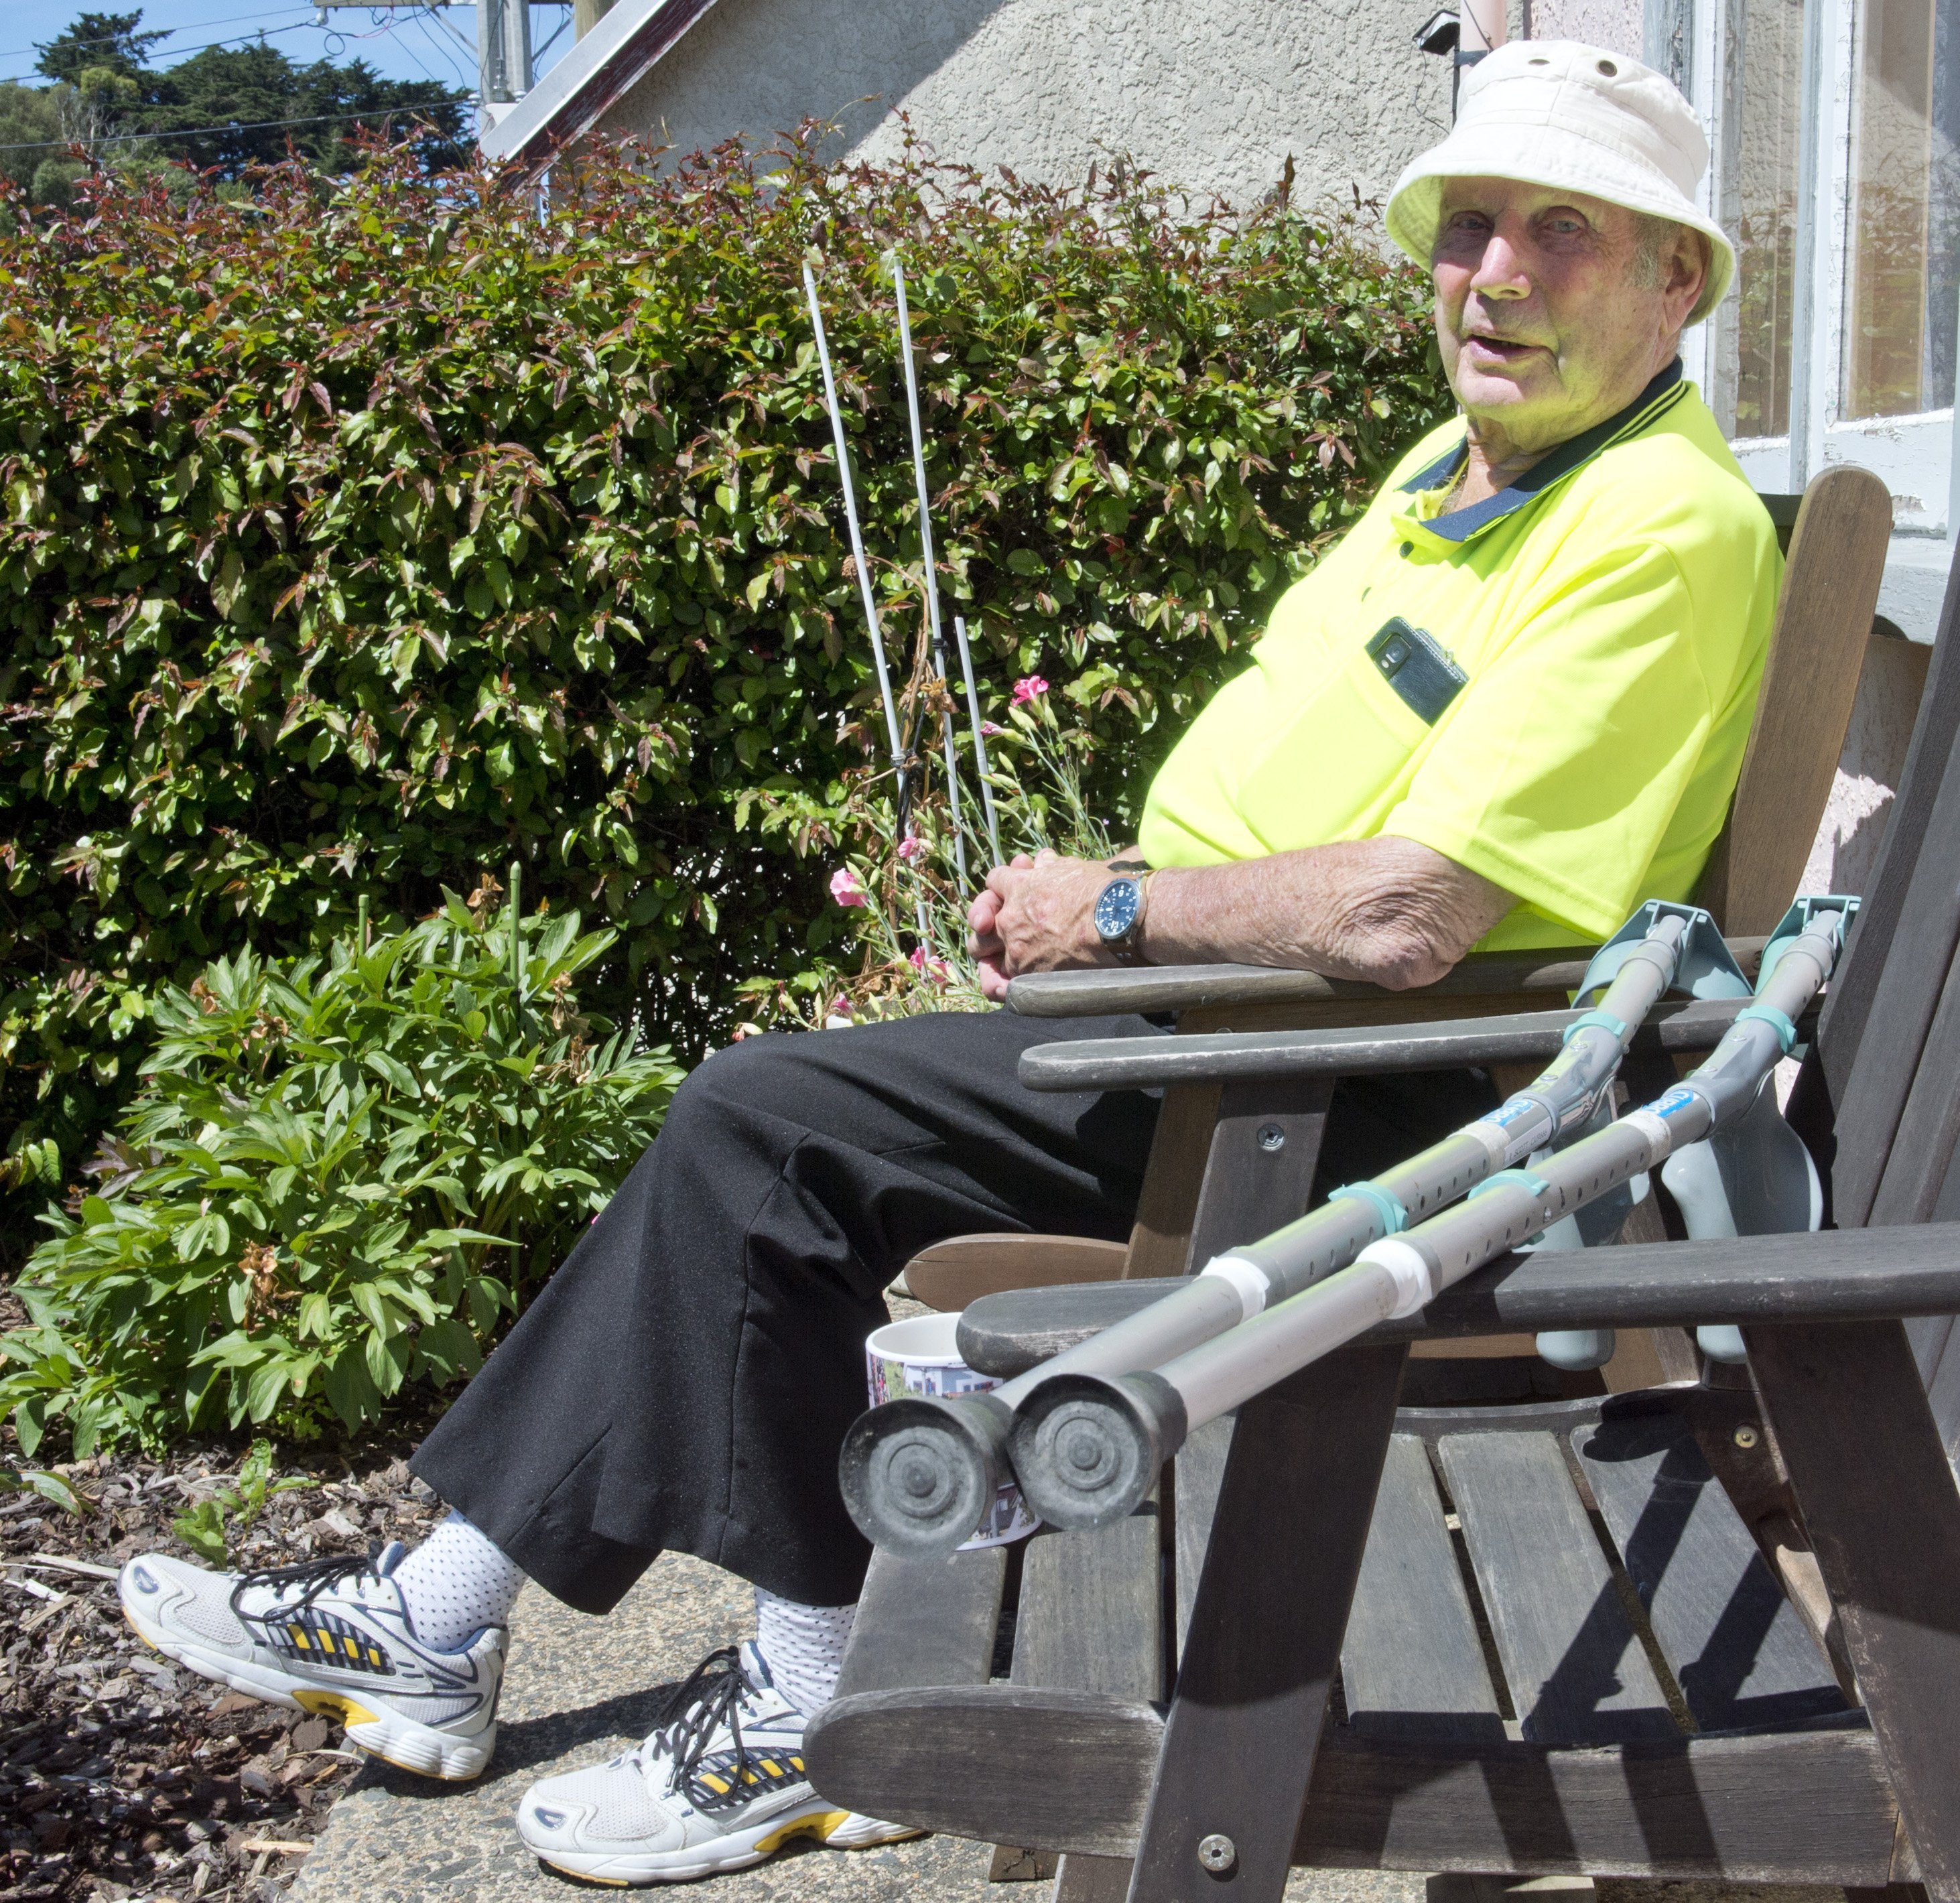 Port Chalmers resident Ray Scott says people deserve better and faster treatment from the health...